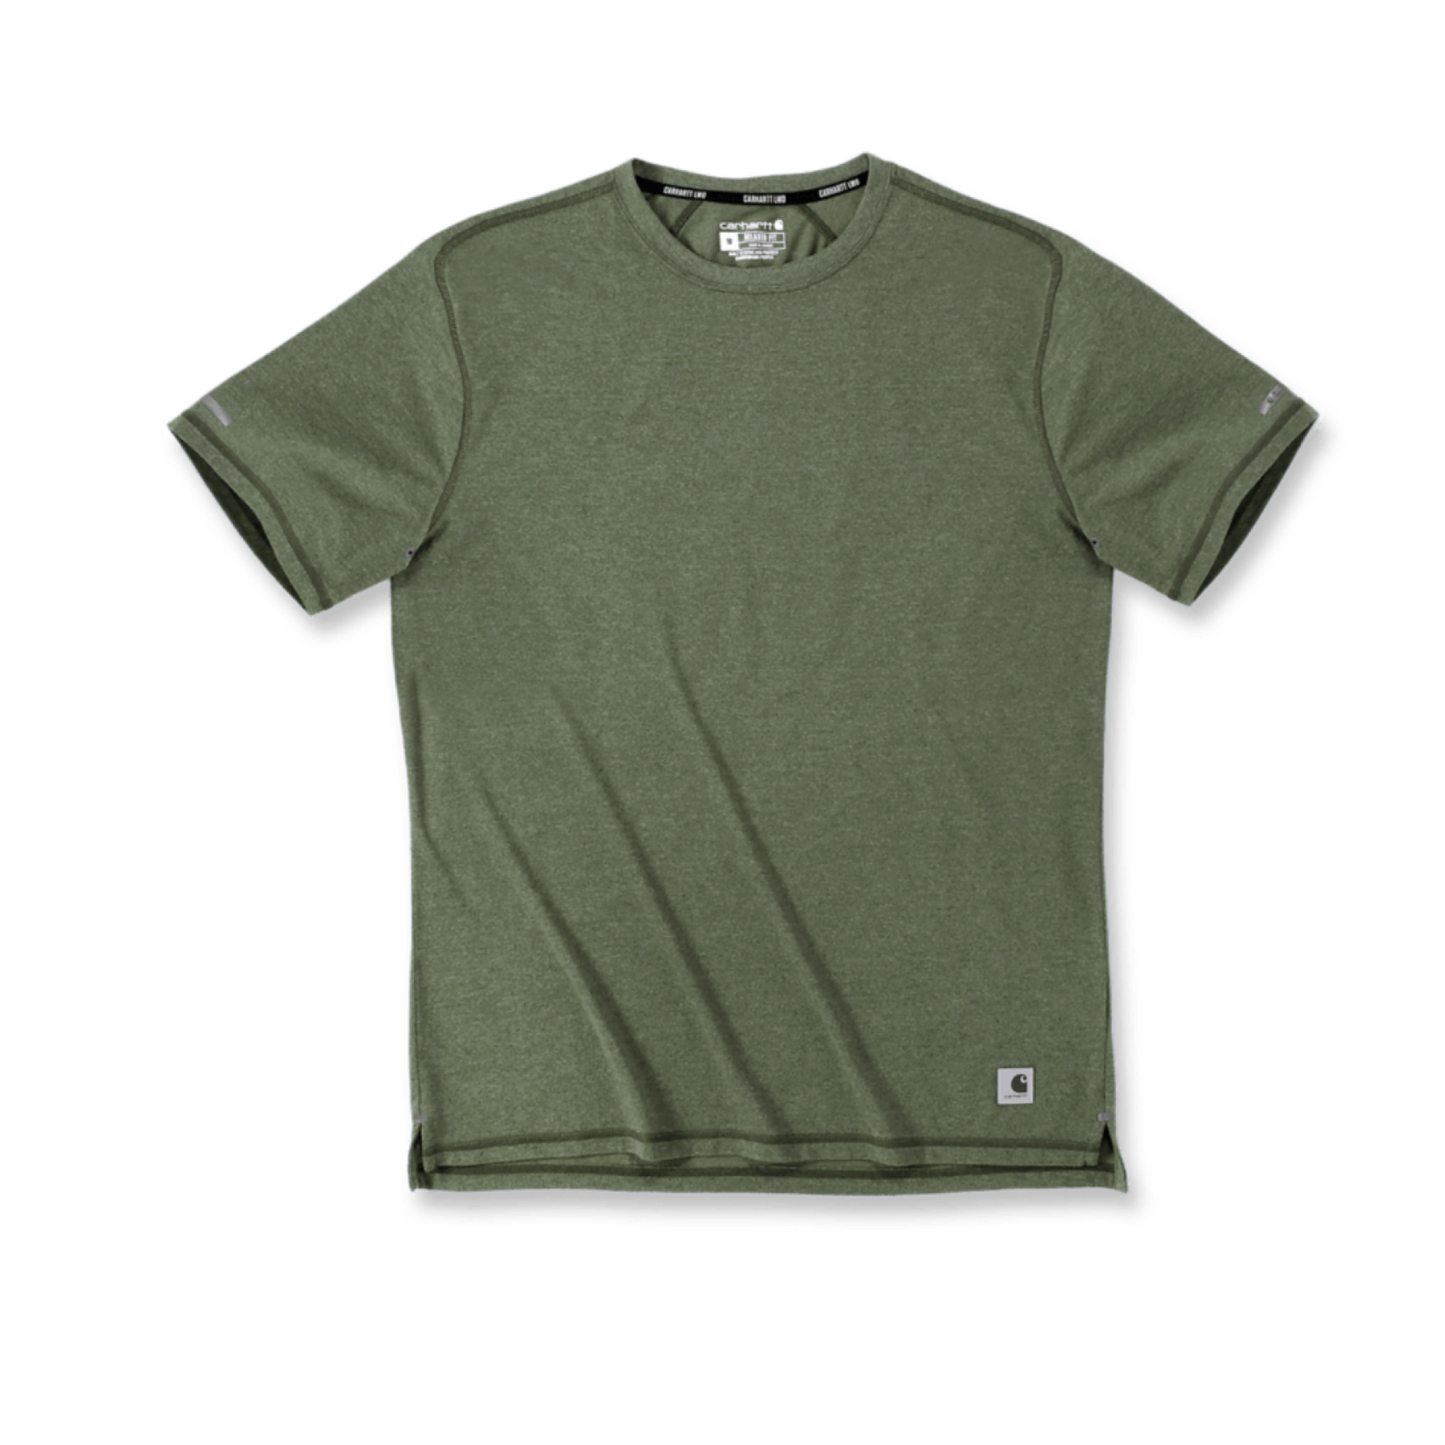 Carhartt Force Extremes Short Sleeve T-Shirt Chive Heather Olive 105858